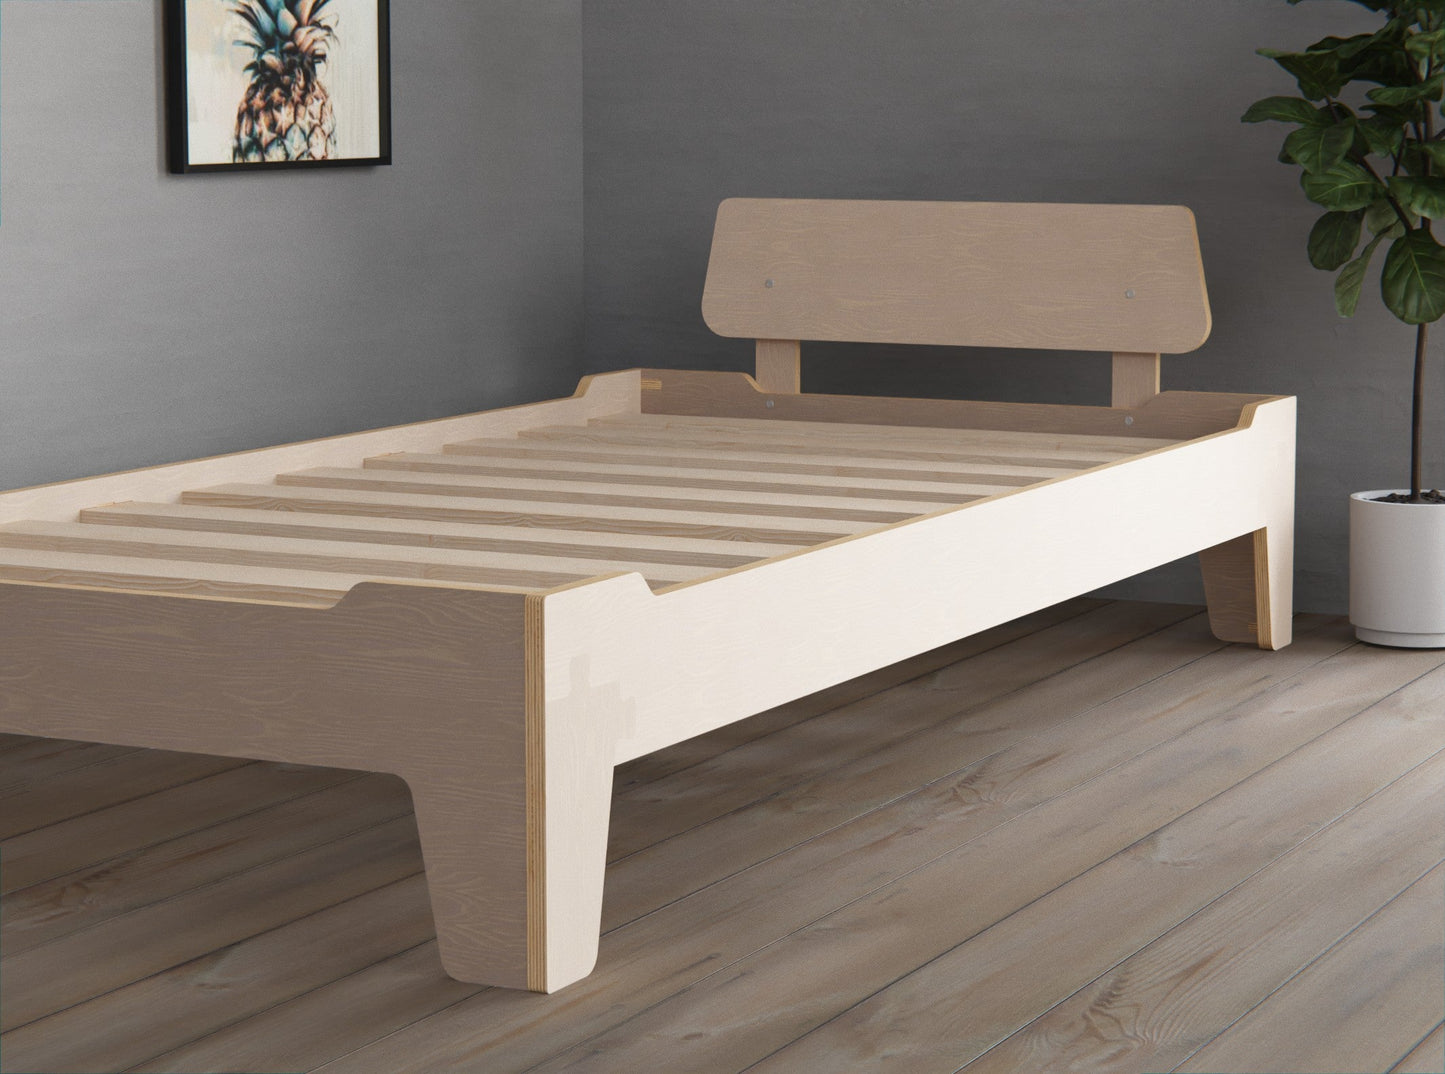 Flippable floor bed from wood with headboard